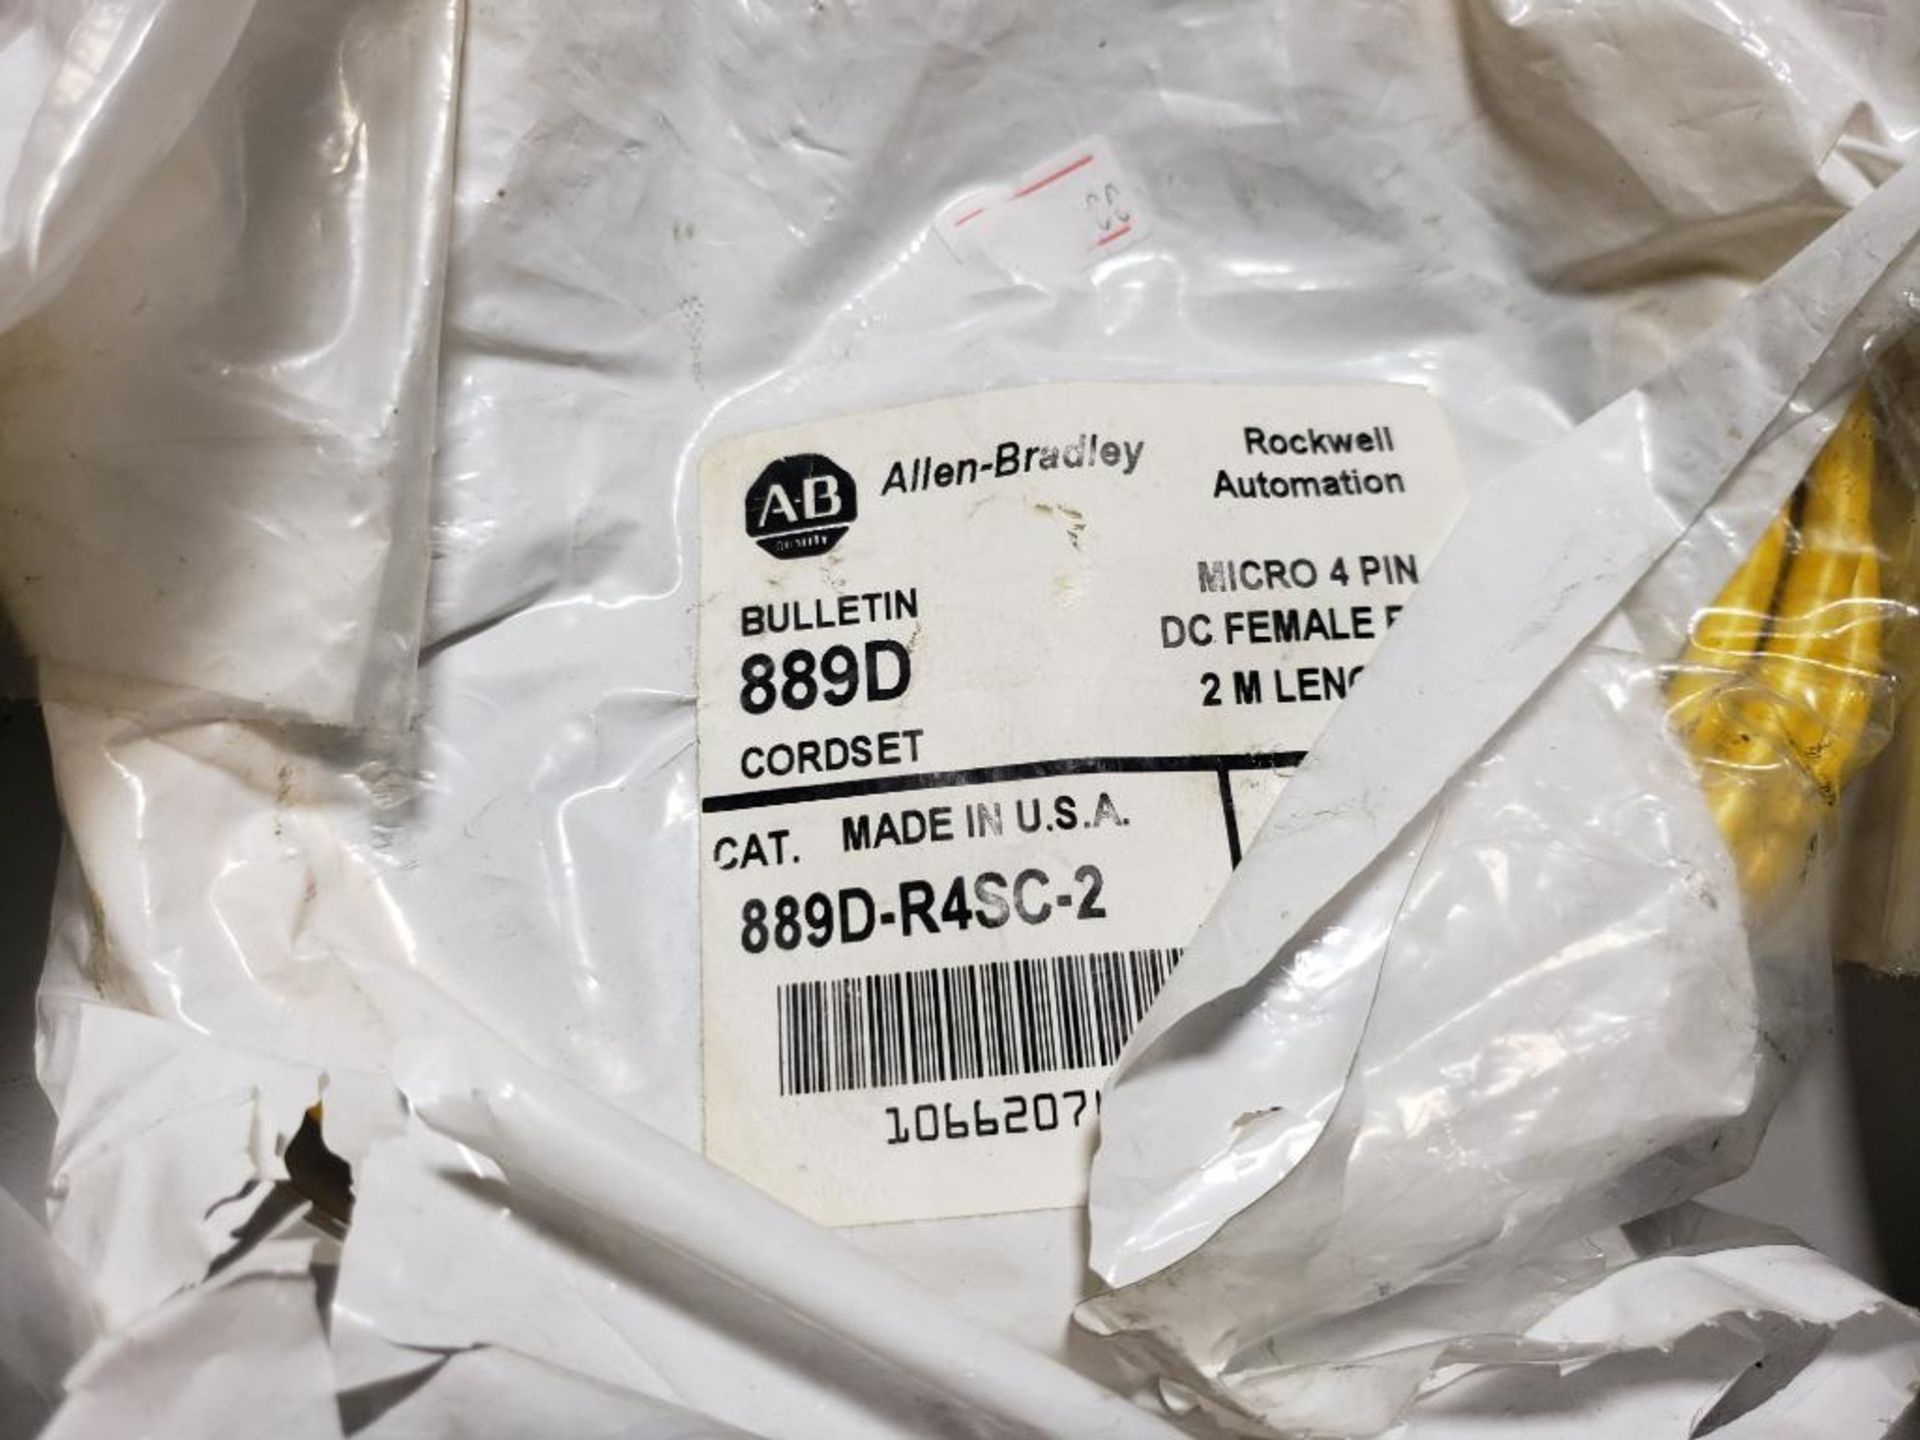 Assorted Allen Bradley interconnect cables. - Image 9 of 11